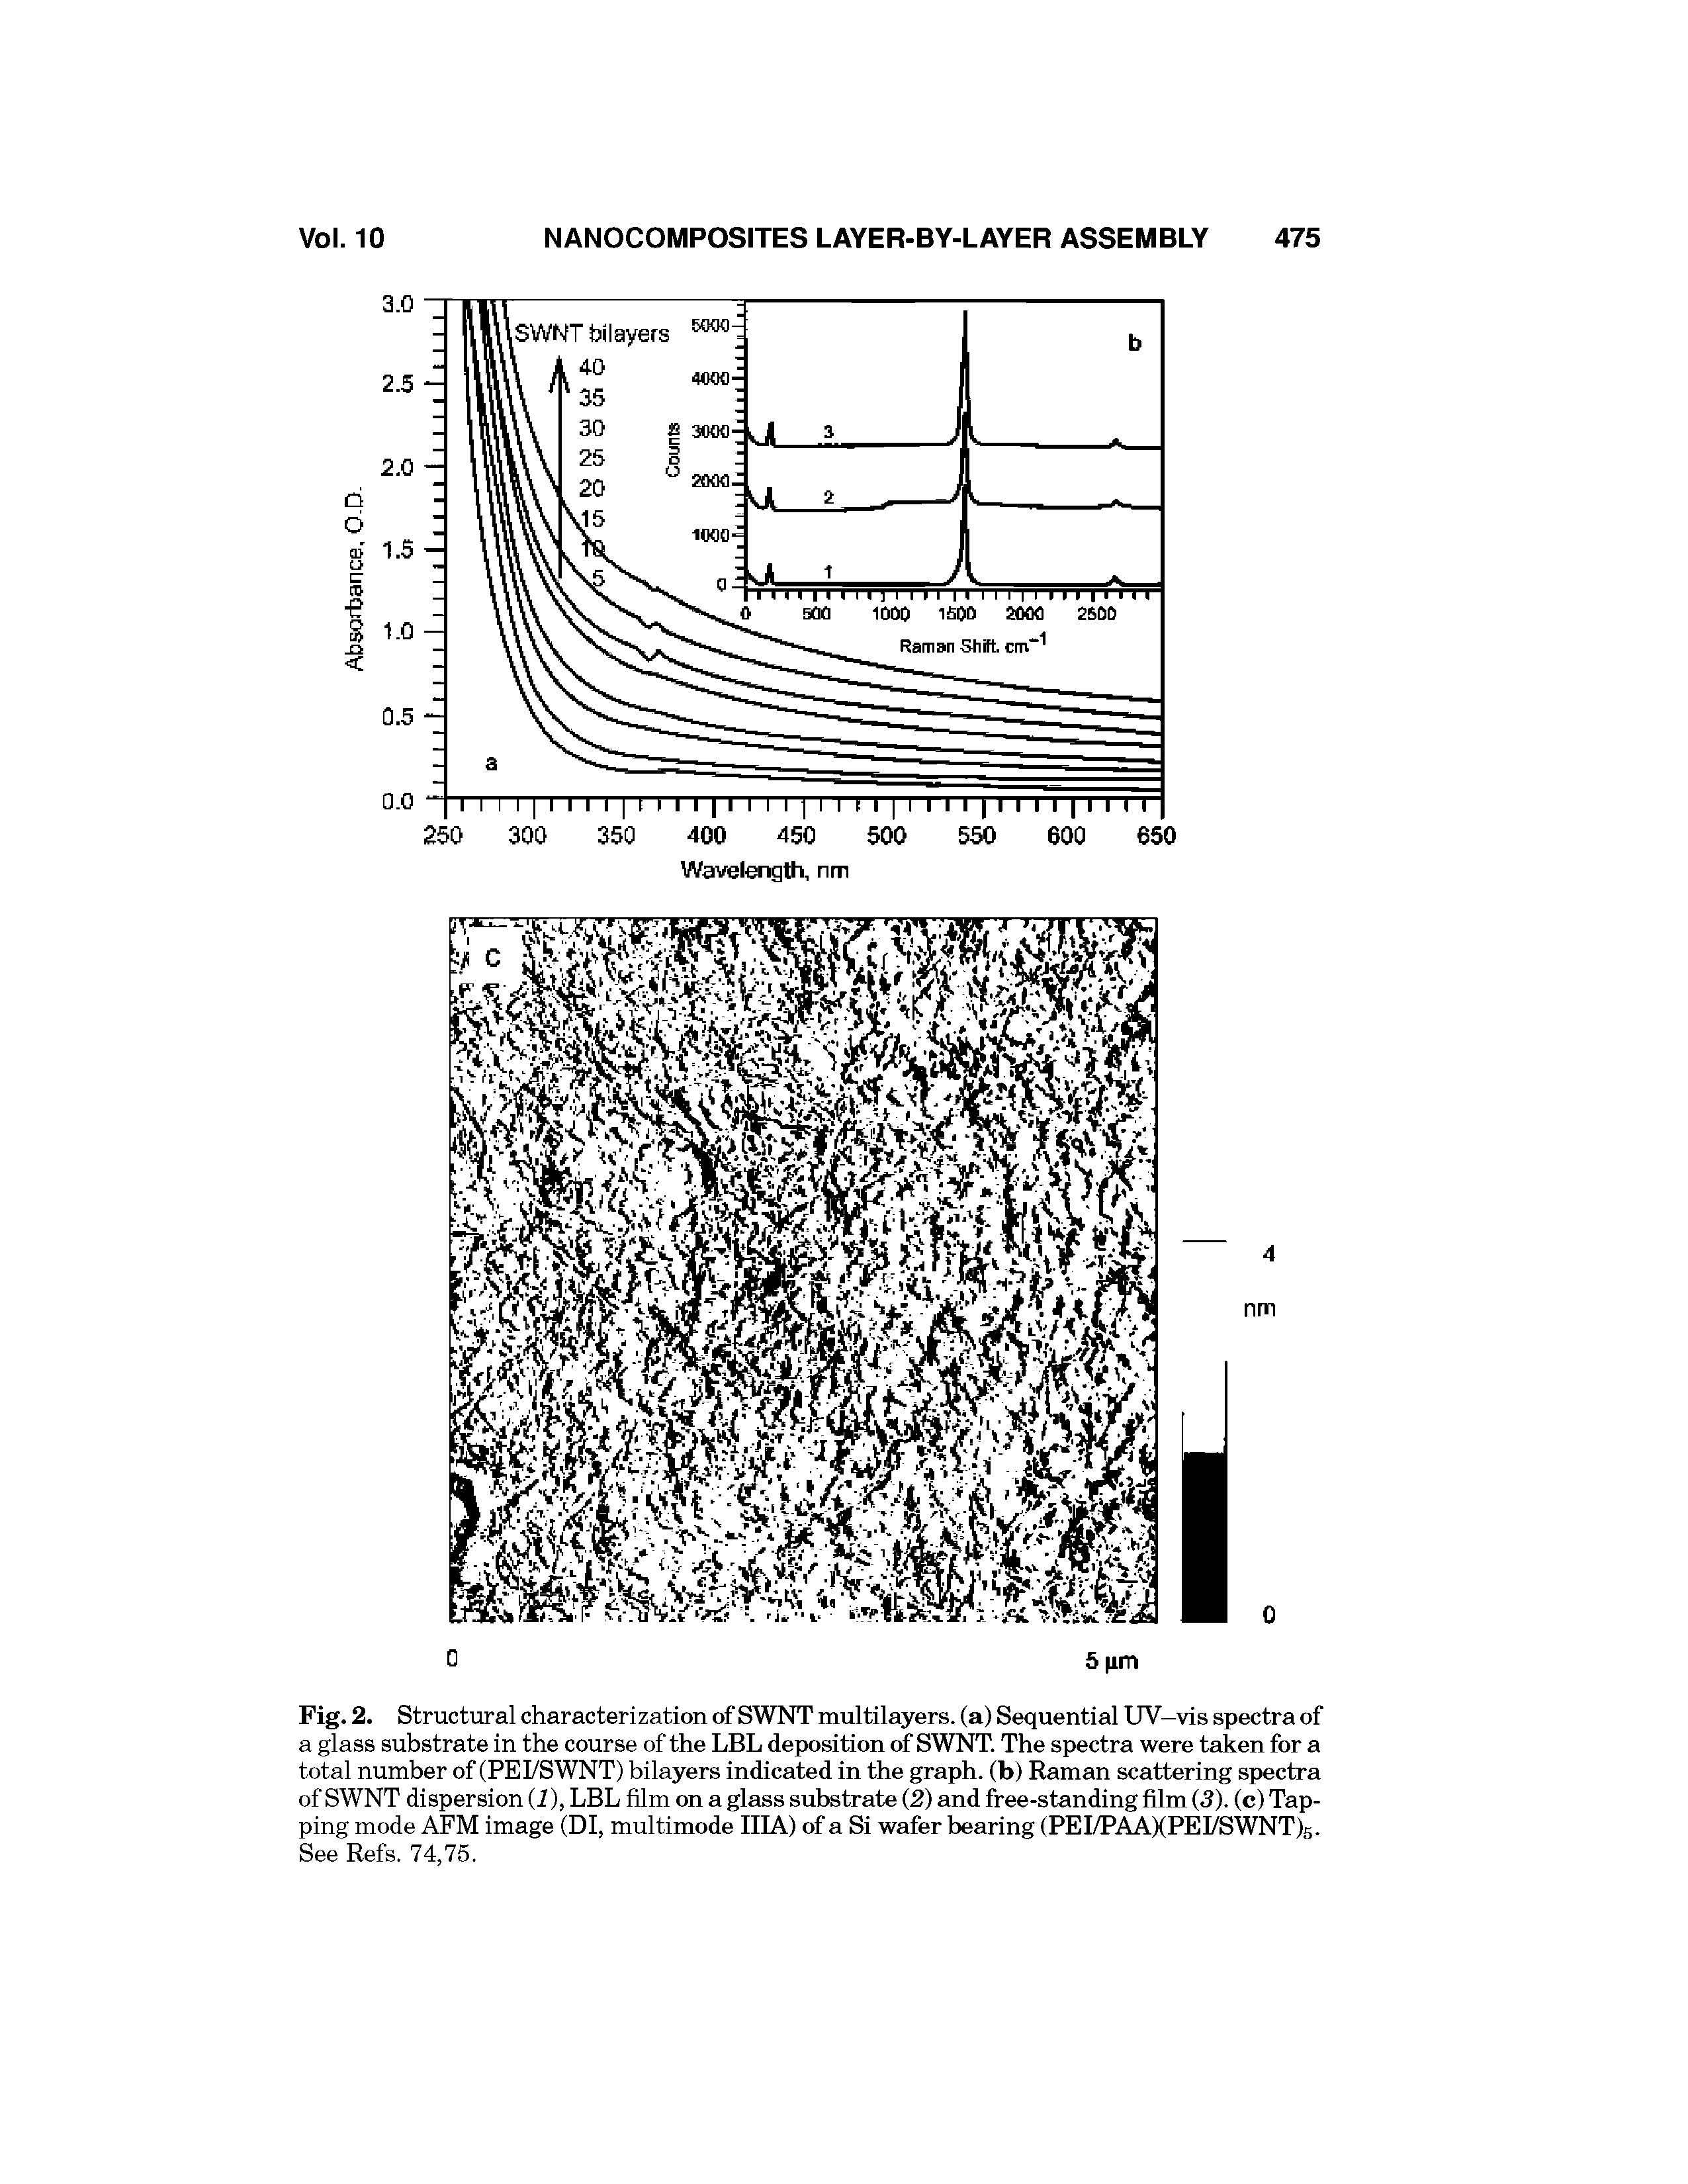 Fig. 2. Structural characterization of SWNT multilayers, (a) Sequential UV-vis spectra of a glass substrate in the course of the LBL deposition of SWNT. The spectra were taken for a total number of (PEFSWNT) bilayers indicated in the graph, (b) Raman scattering spectra of SWNT dispersion (1), LBL film on a glass substrate (2) and free-standing film (3). (c) Tapping mode AFM image (DI, multimode IIIA) of a Si wafer bearing (PEI/PAAXPEI/SWNTls. See Refs. 74,75.